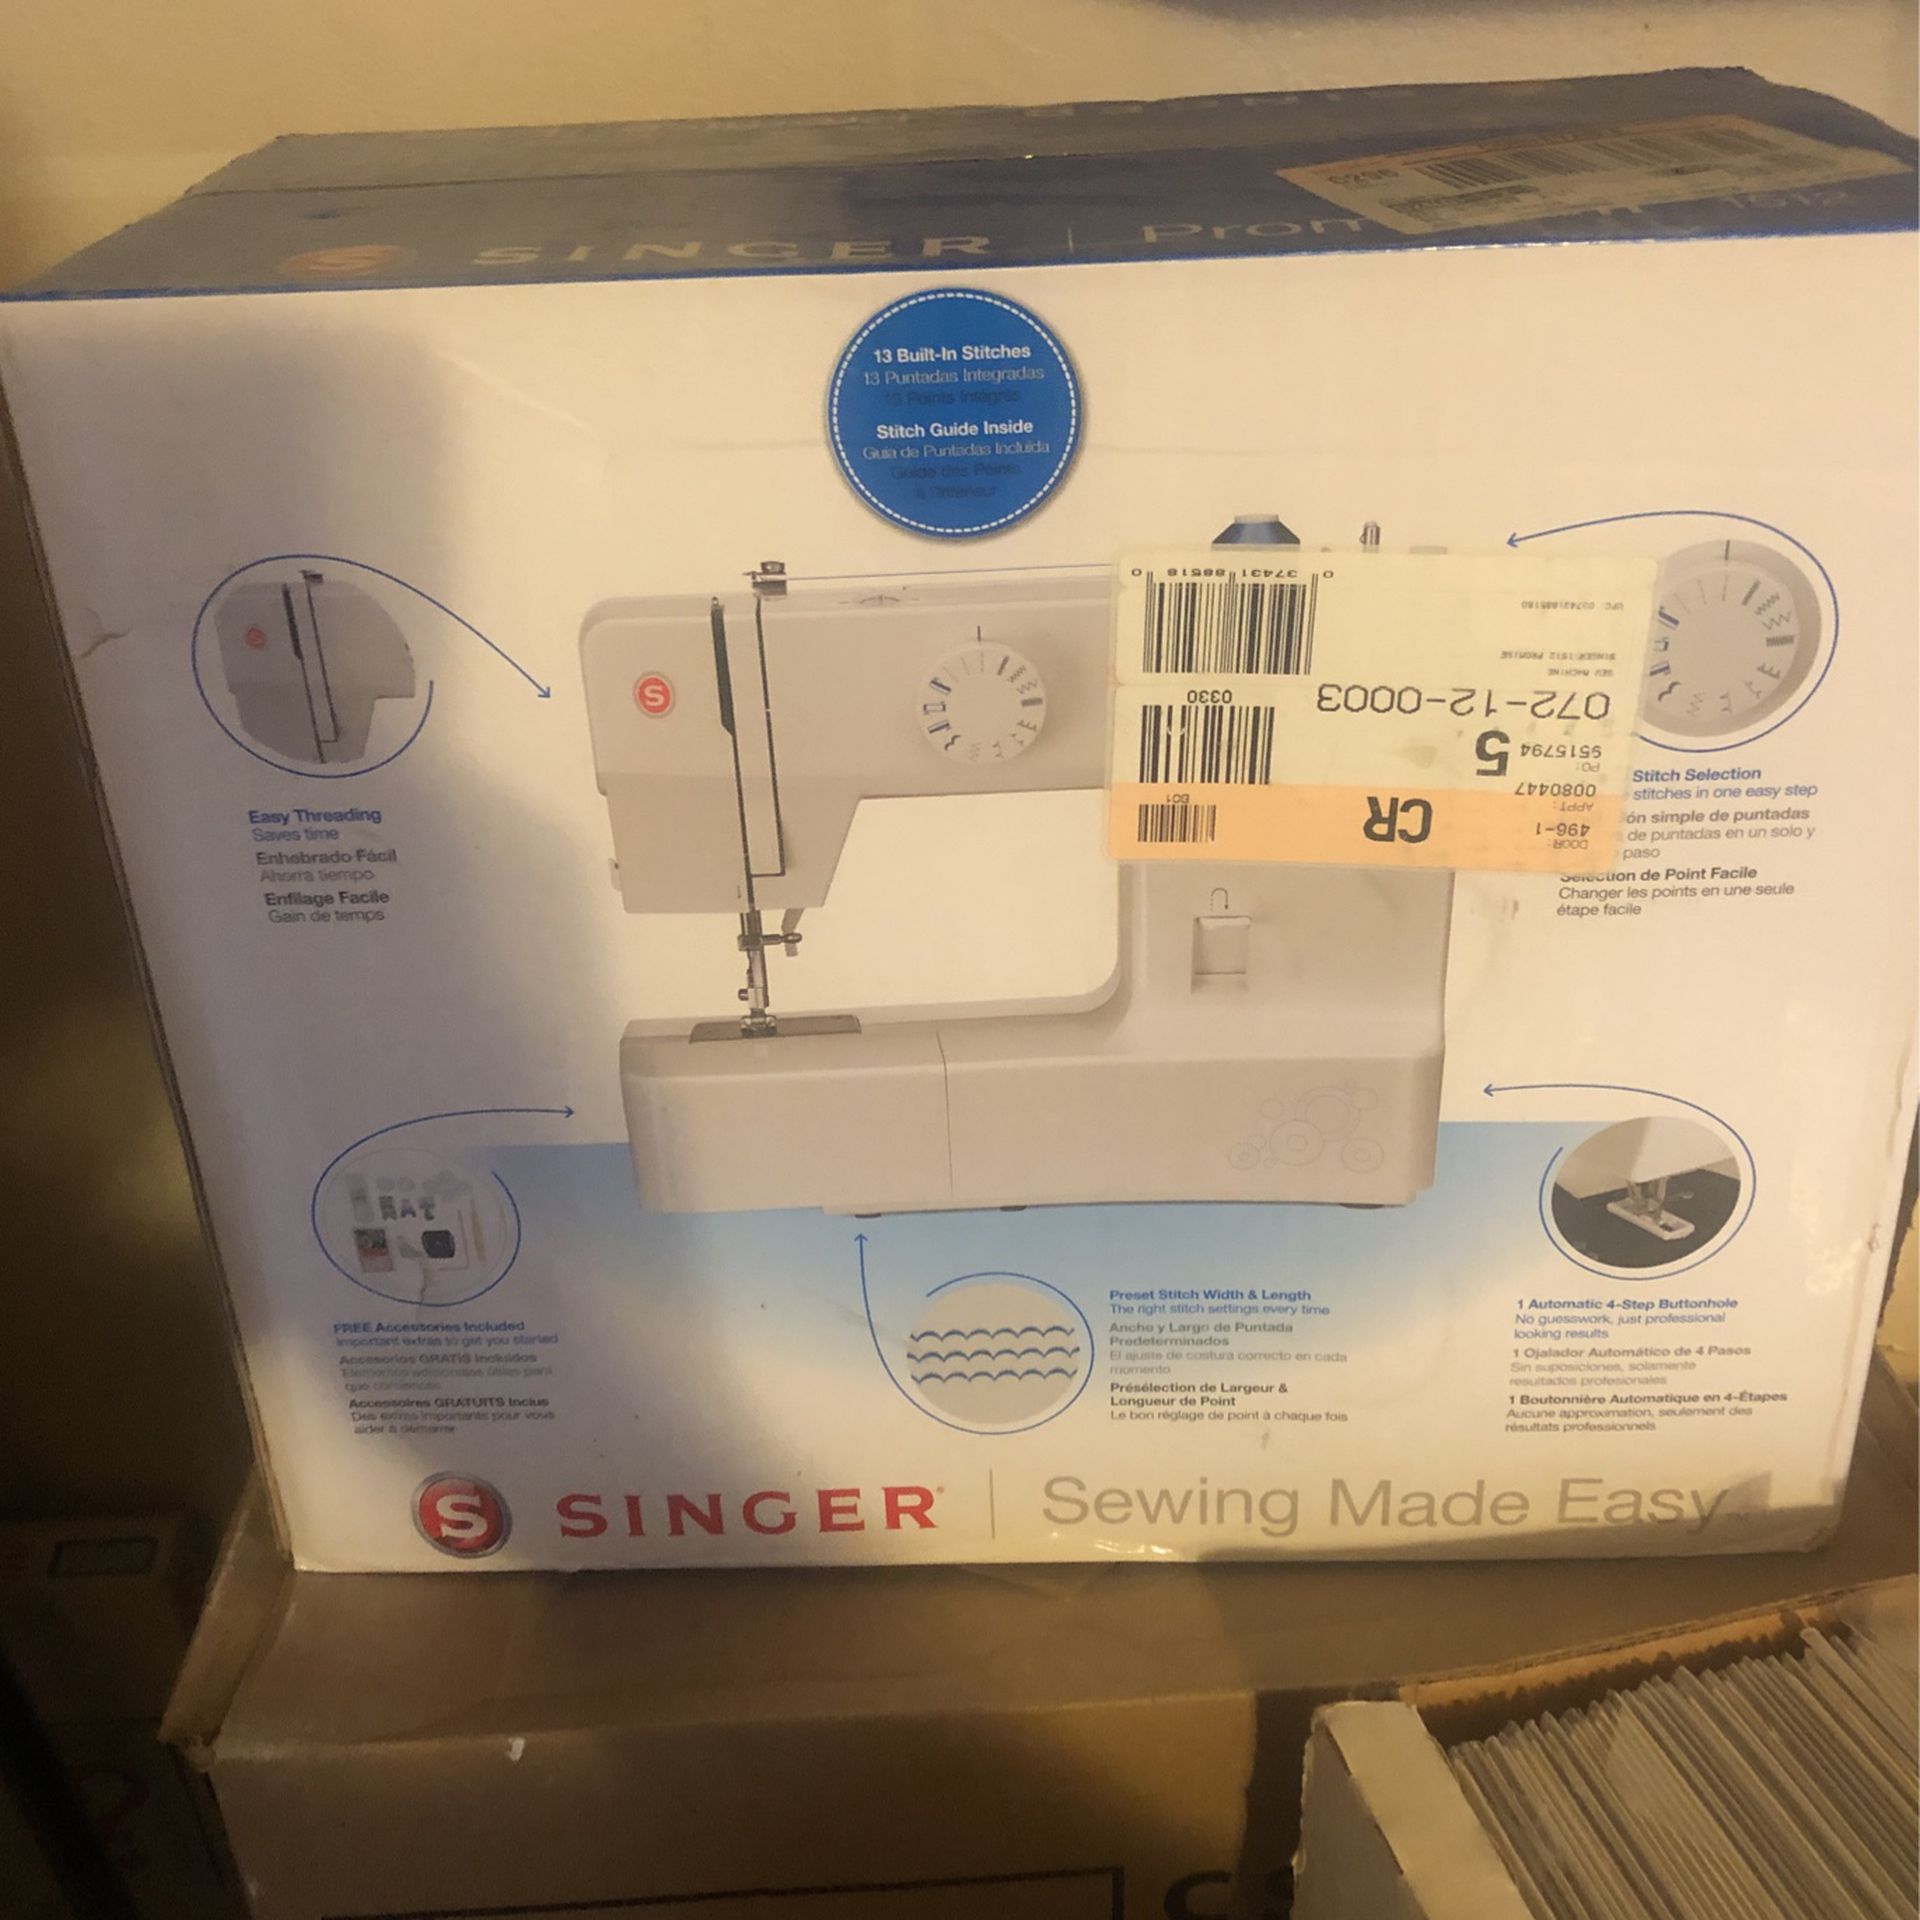 Brand new singer promise to 1512 sewing machine